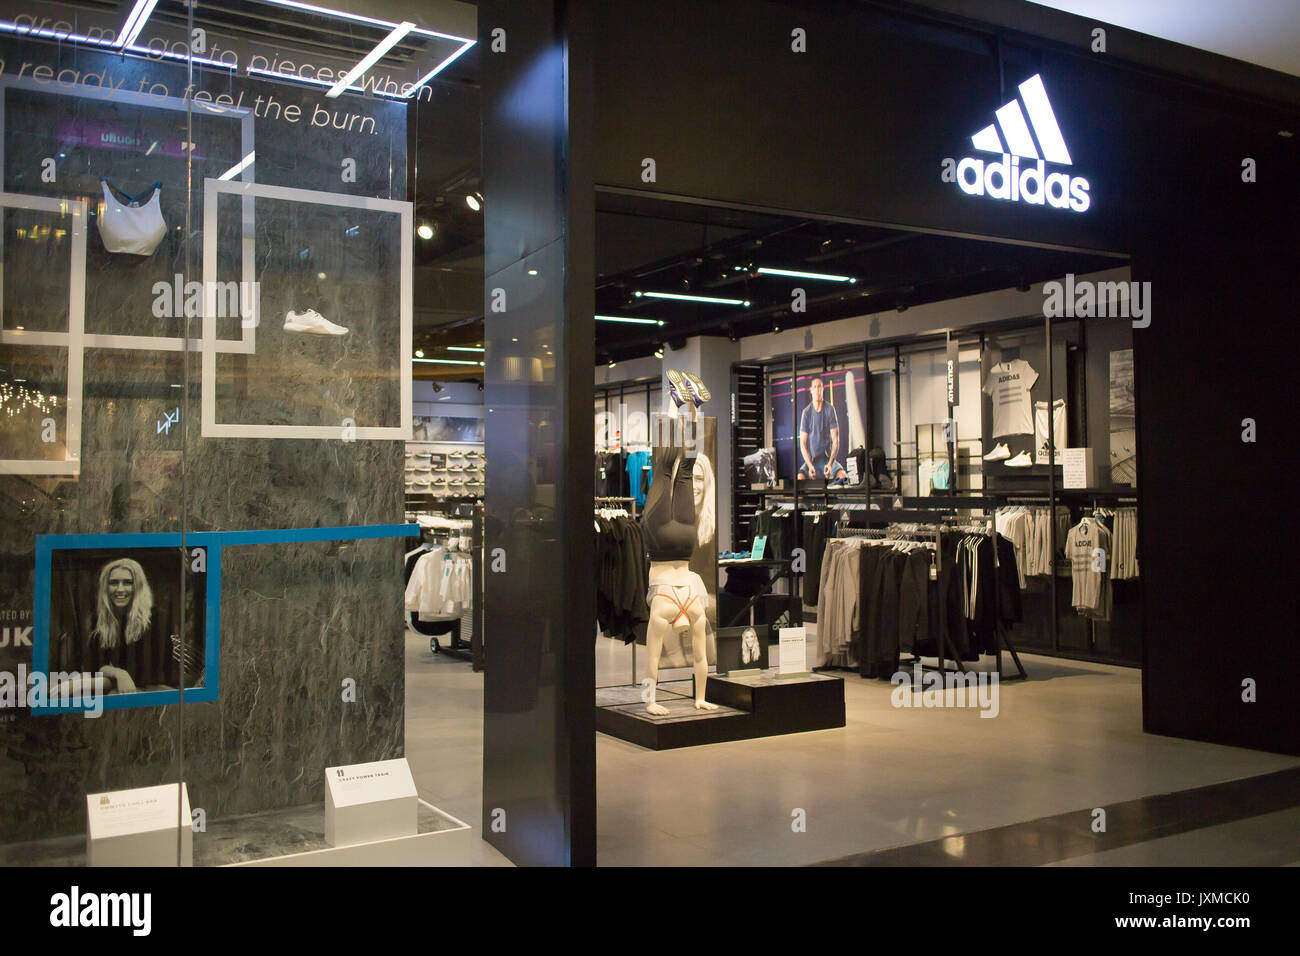 CHIANG MAI, THAILAND - AUGUST 16 2017: Adidas shop In Central Stock Photo -  Alamy